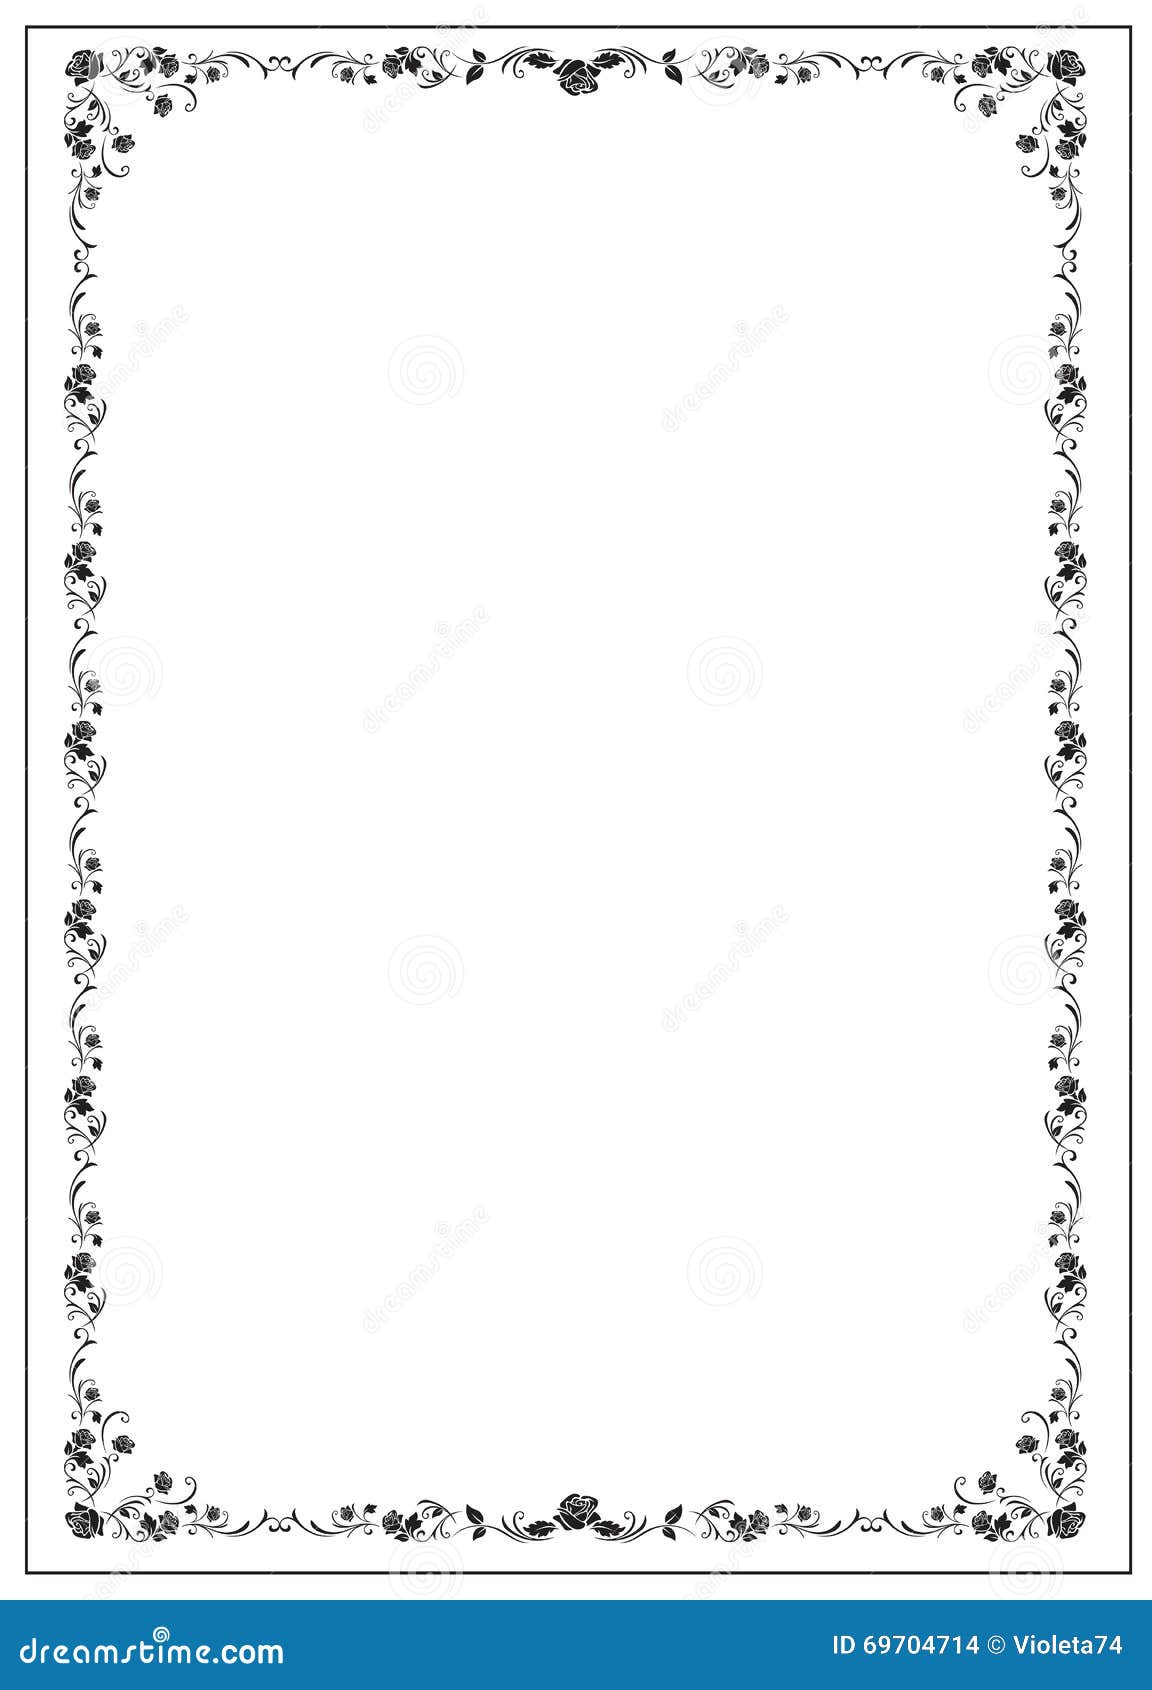 certificate template with floral rose s.